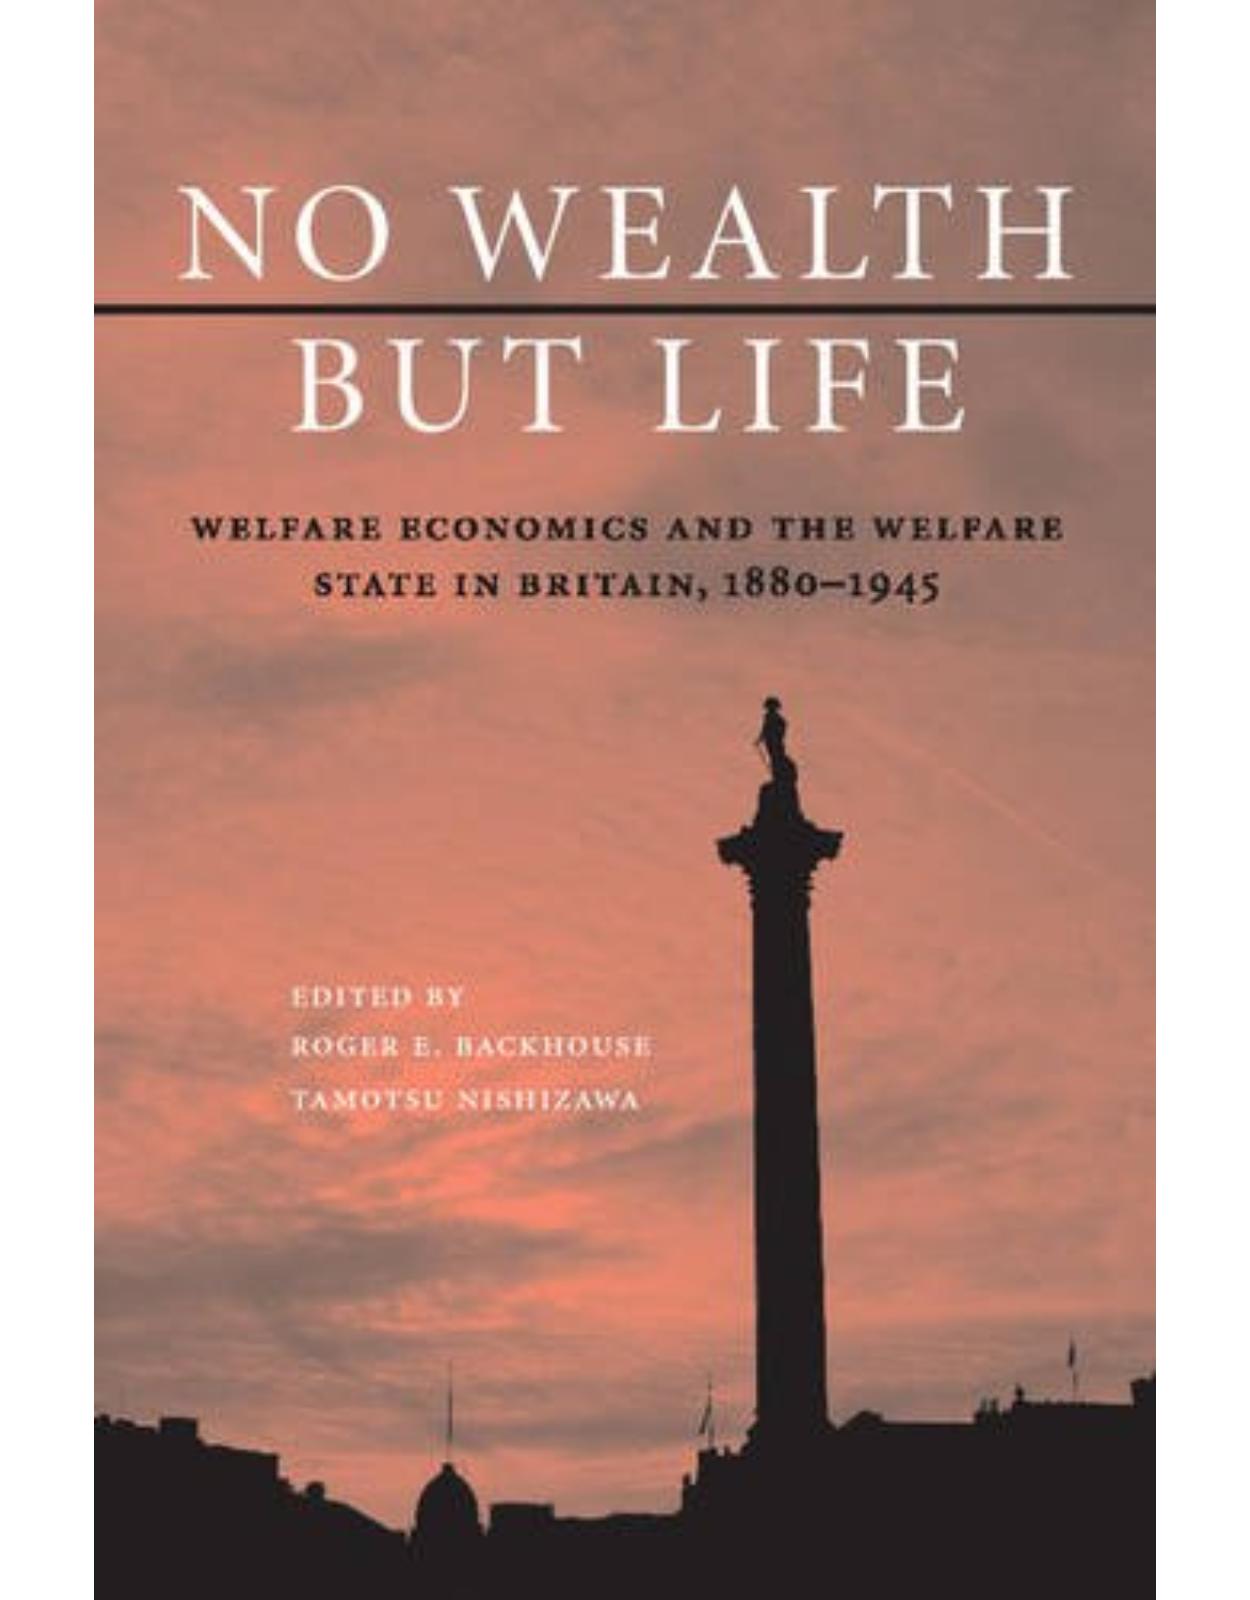 No Wealth but Life: Welfare Economics and the Welfare State in Britain, 1880-1945